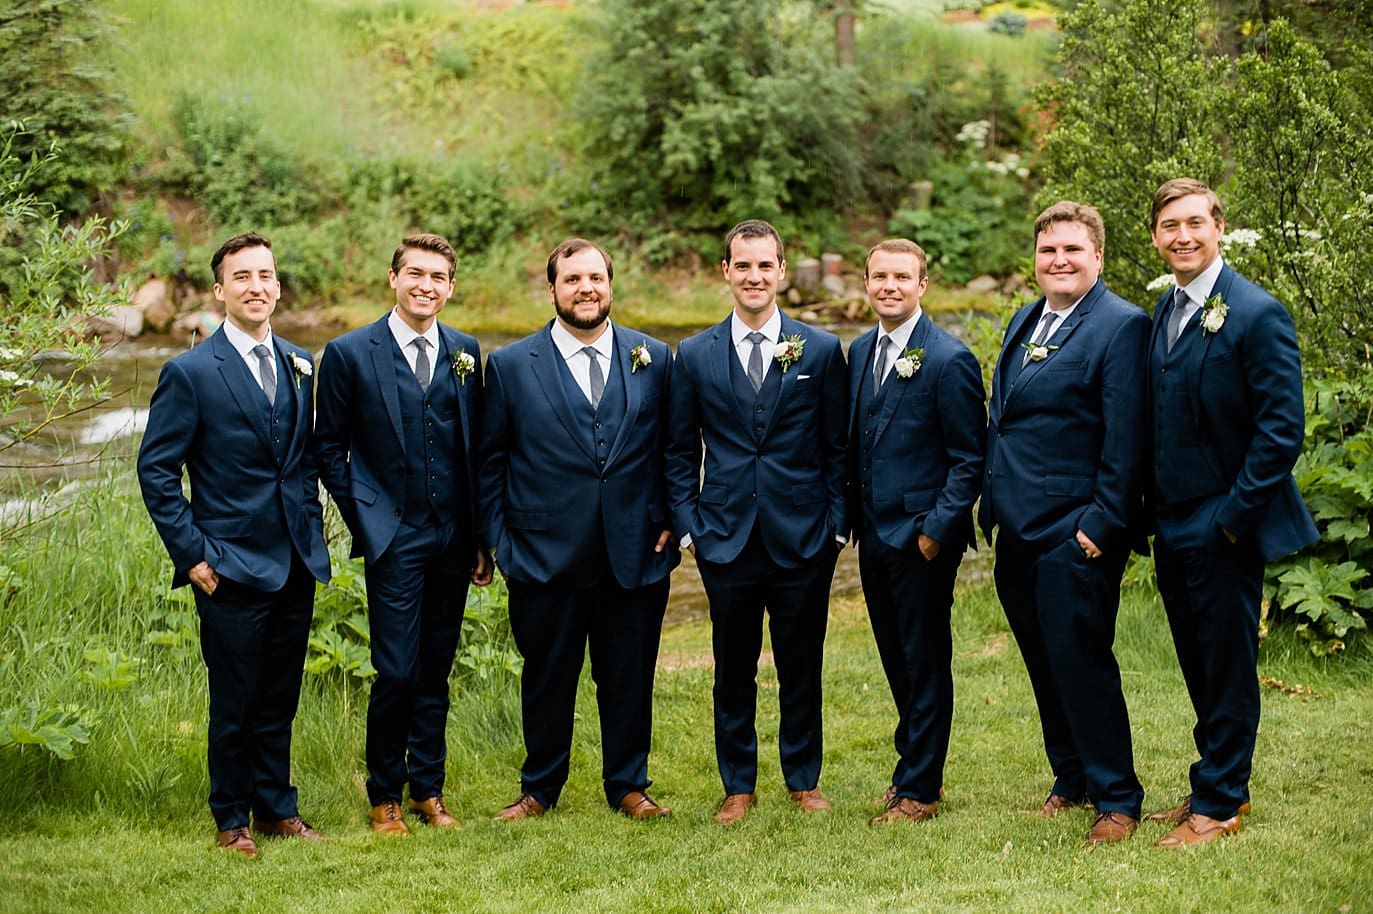 Groom and Groomsmen outdoor Vail wedding by Vail wedding photographer Jennie Crate